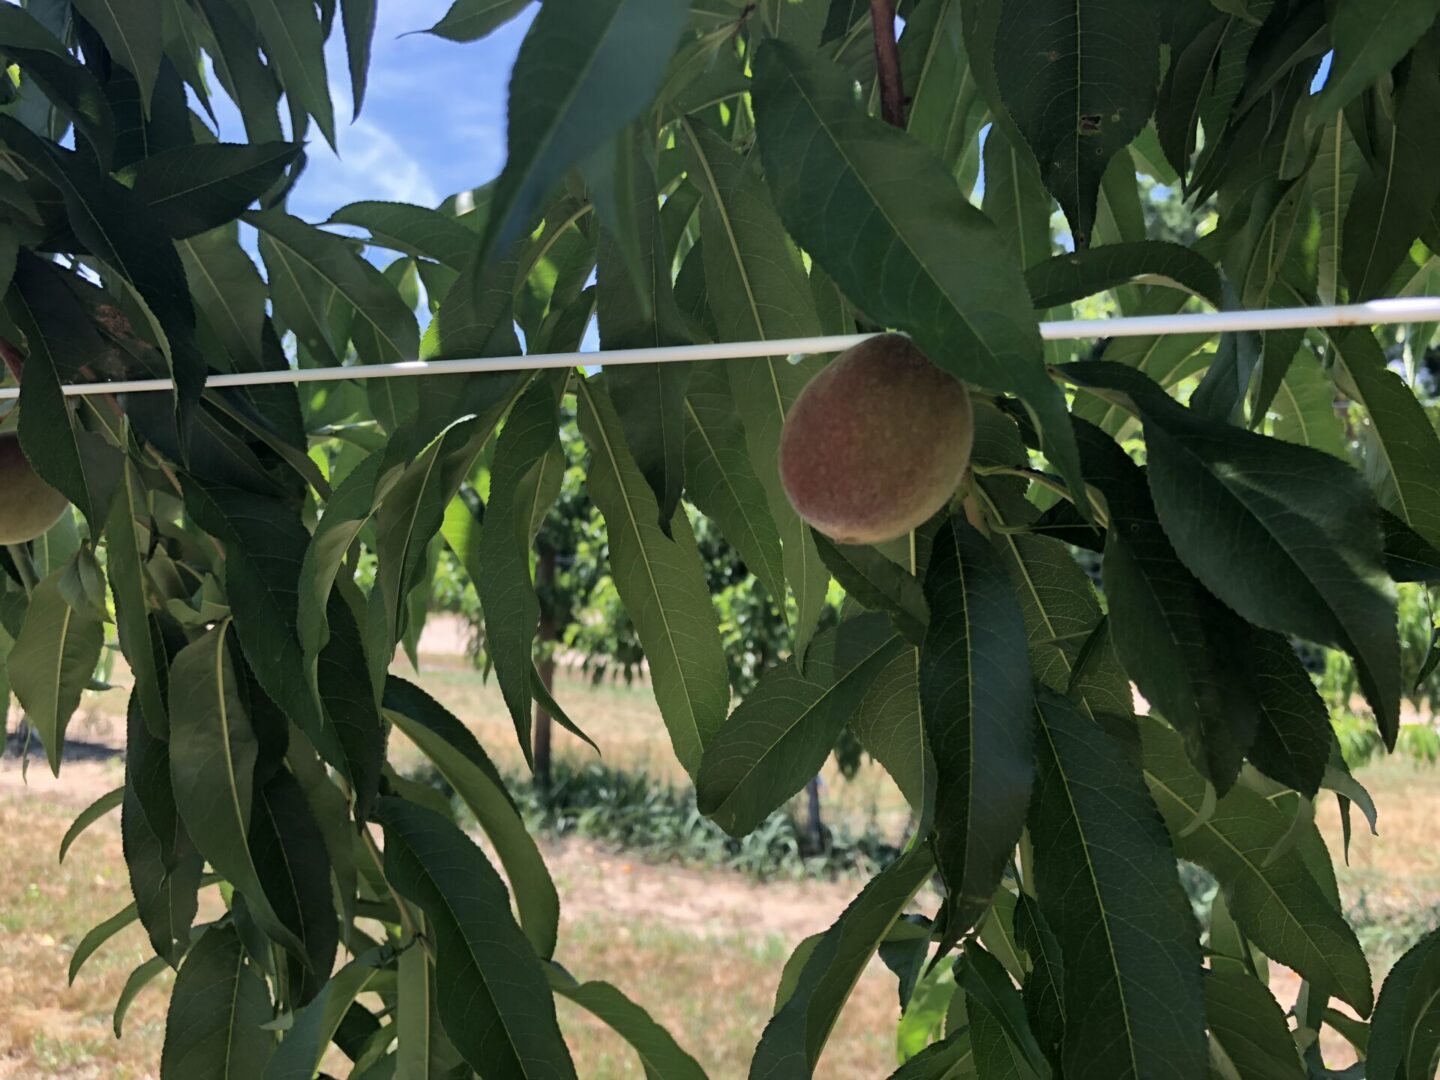 A peach hanging from a tree in the middle of an orchard.